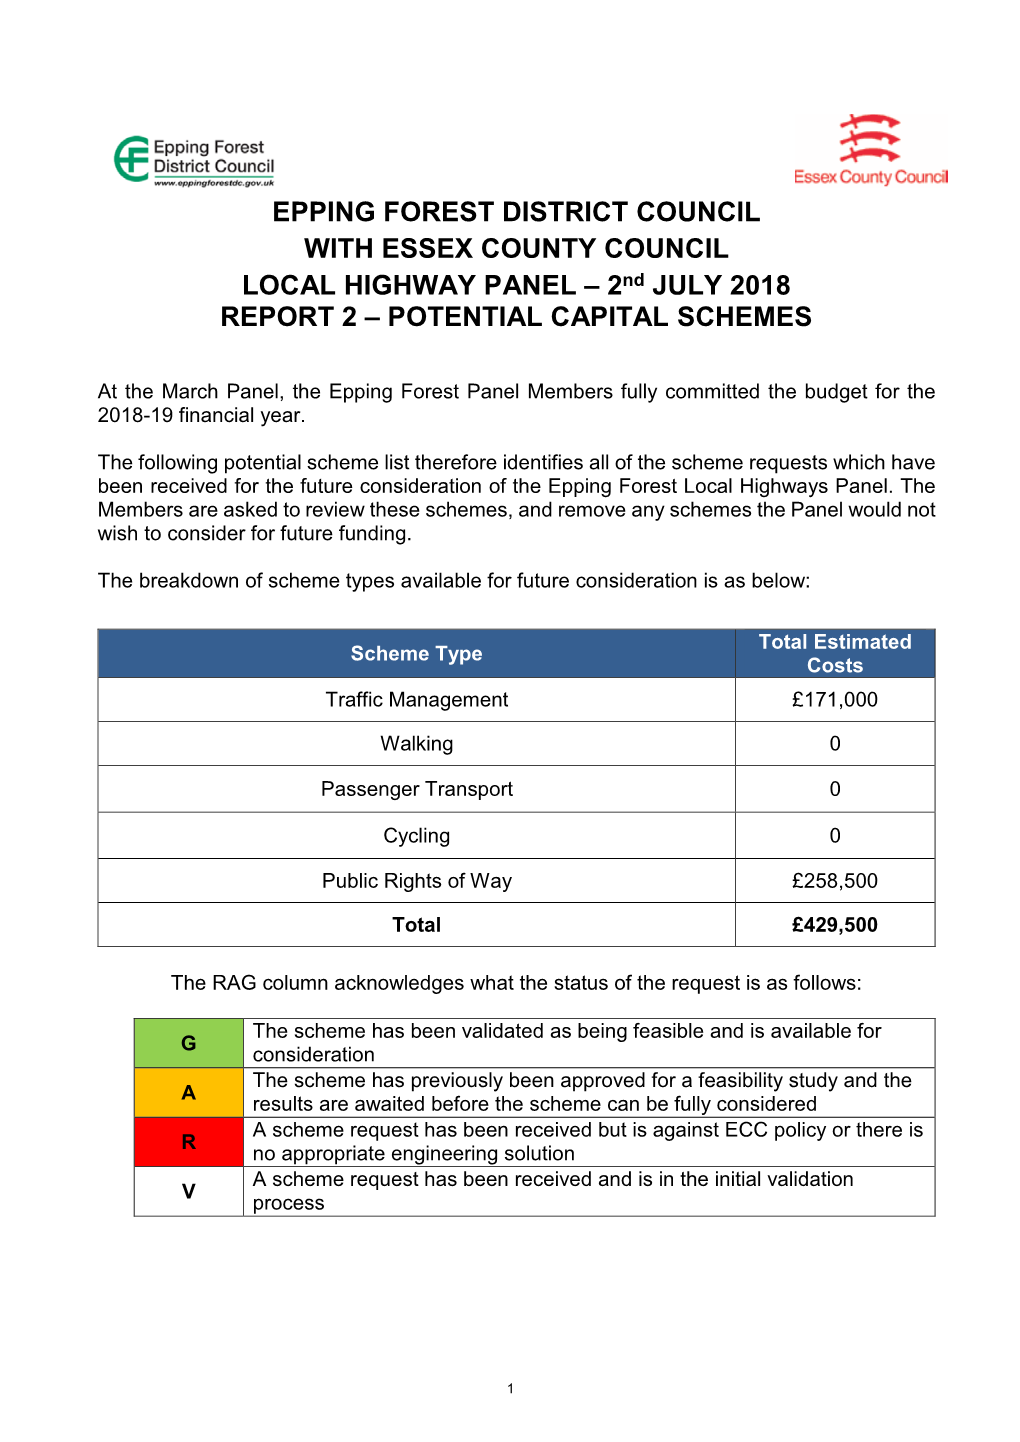 EPPING FOREST DISTRICT COUNCIL with ESSEX COUNTY COUNCIL LOCAL HIGHWAY PANEL – 2Nd JULY 2018 REPORT 2 – POTENTIAL CAPITAL SCHEMES